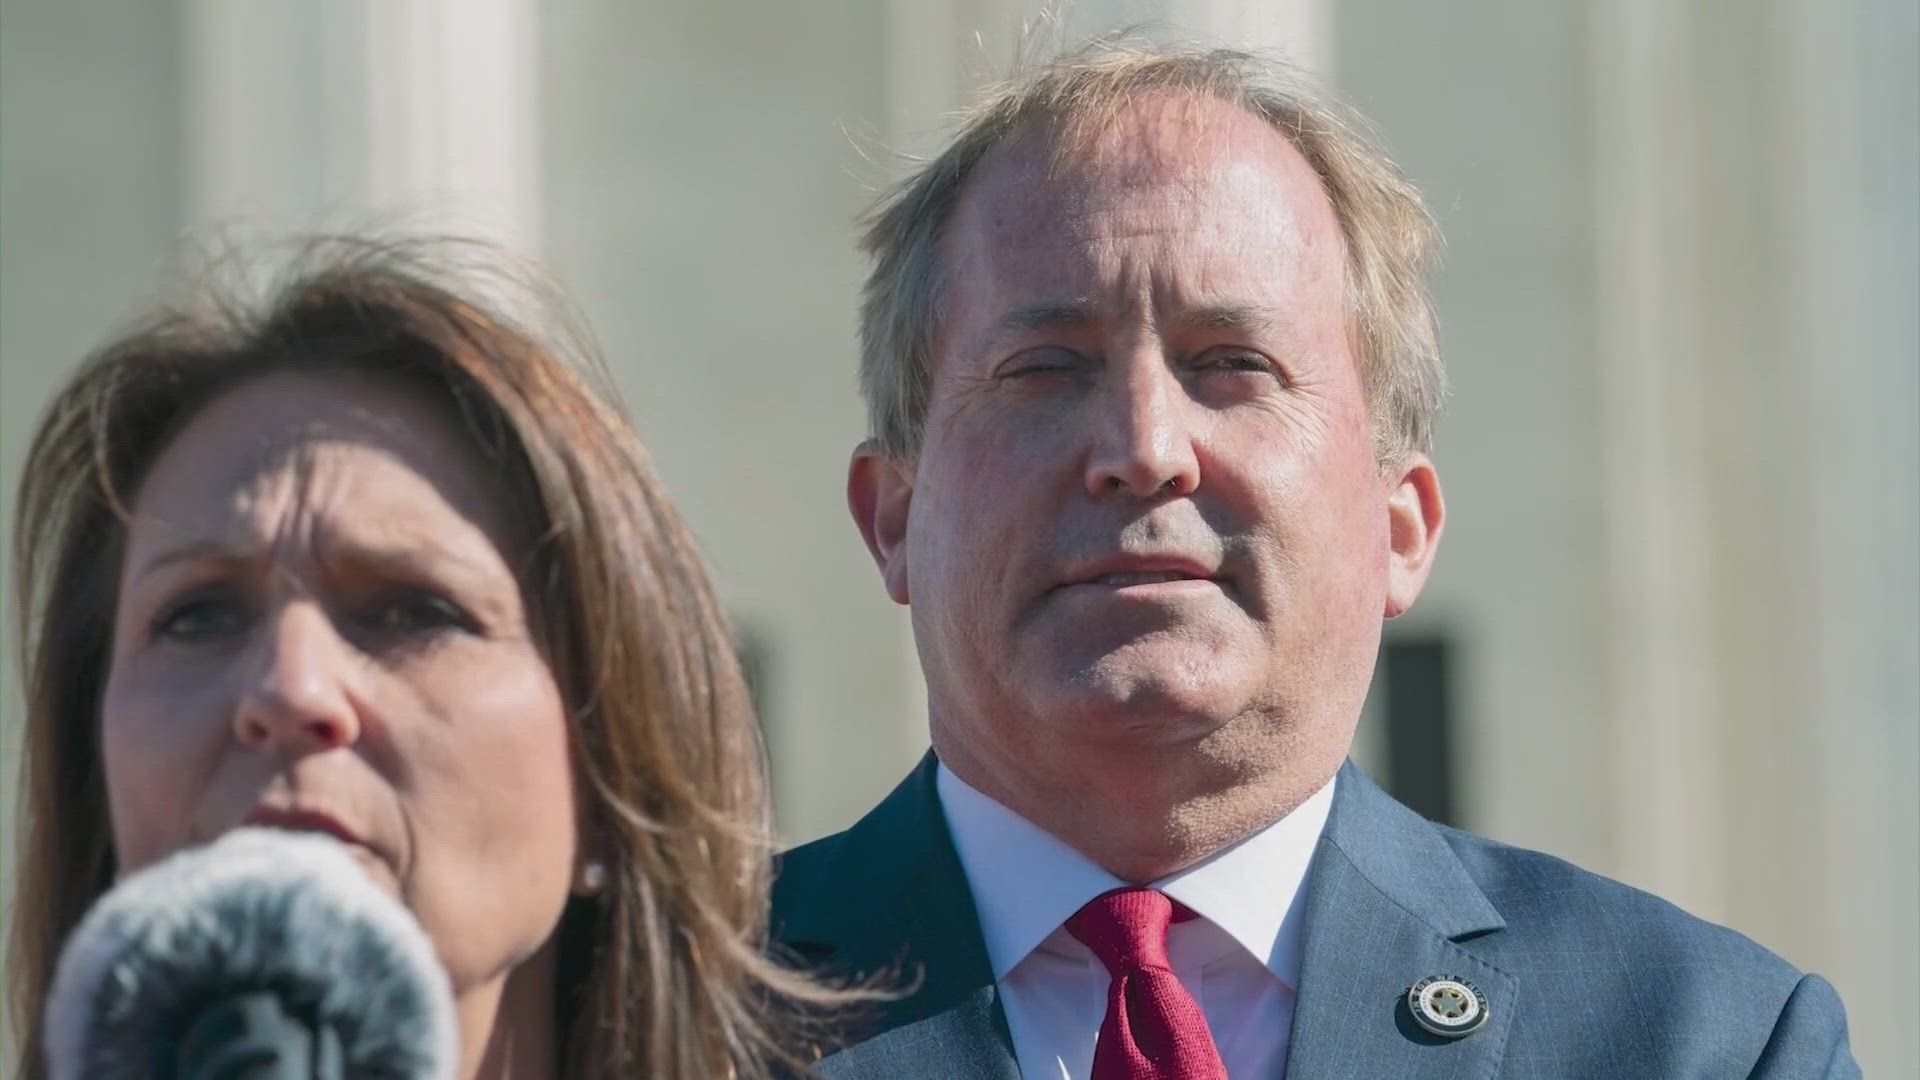 State House members voted to impeach the Texas attorney general after hours of debate Saturday afternoon.